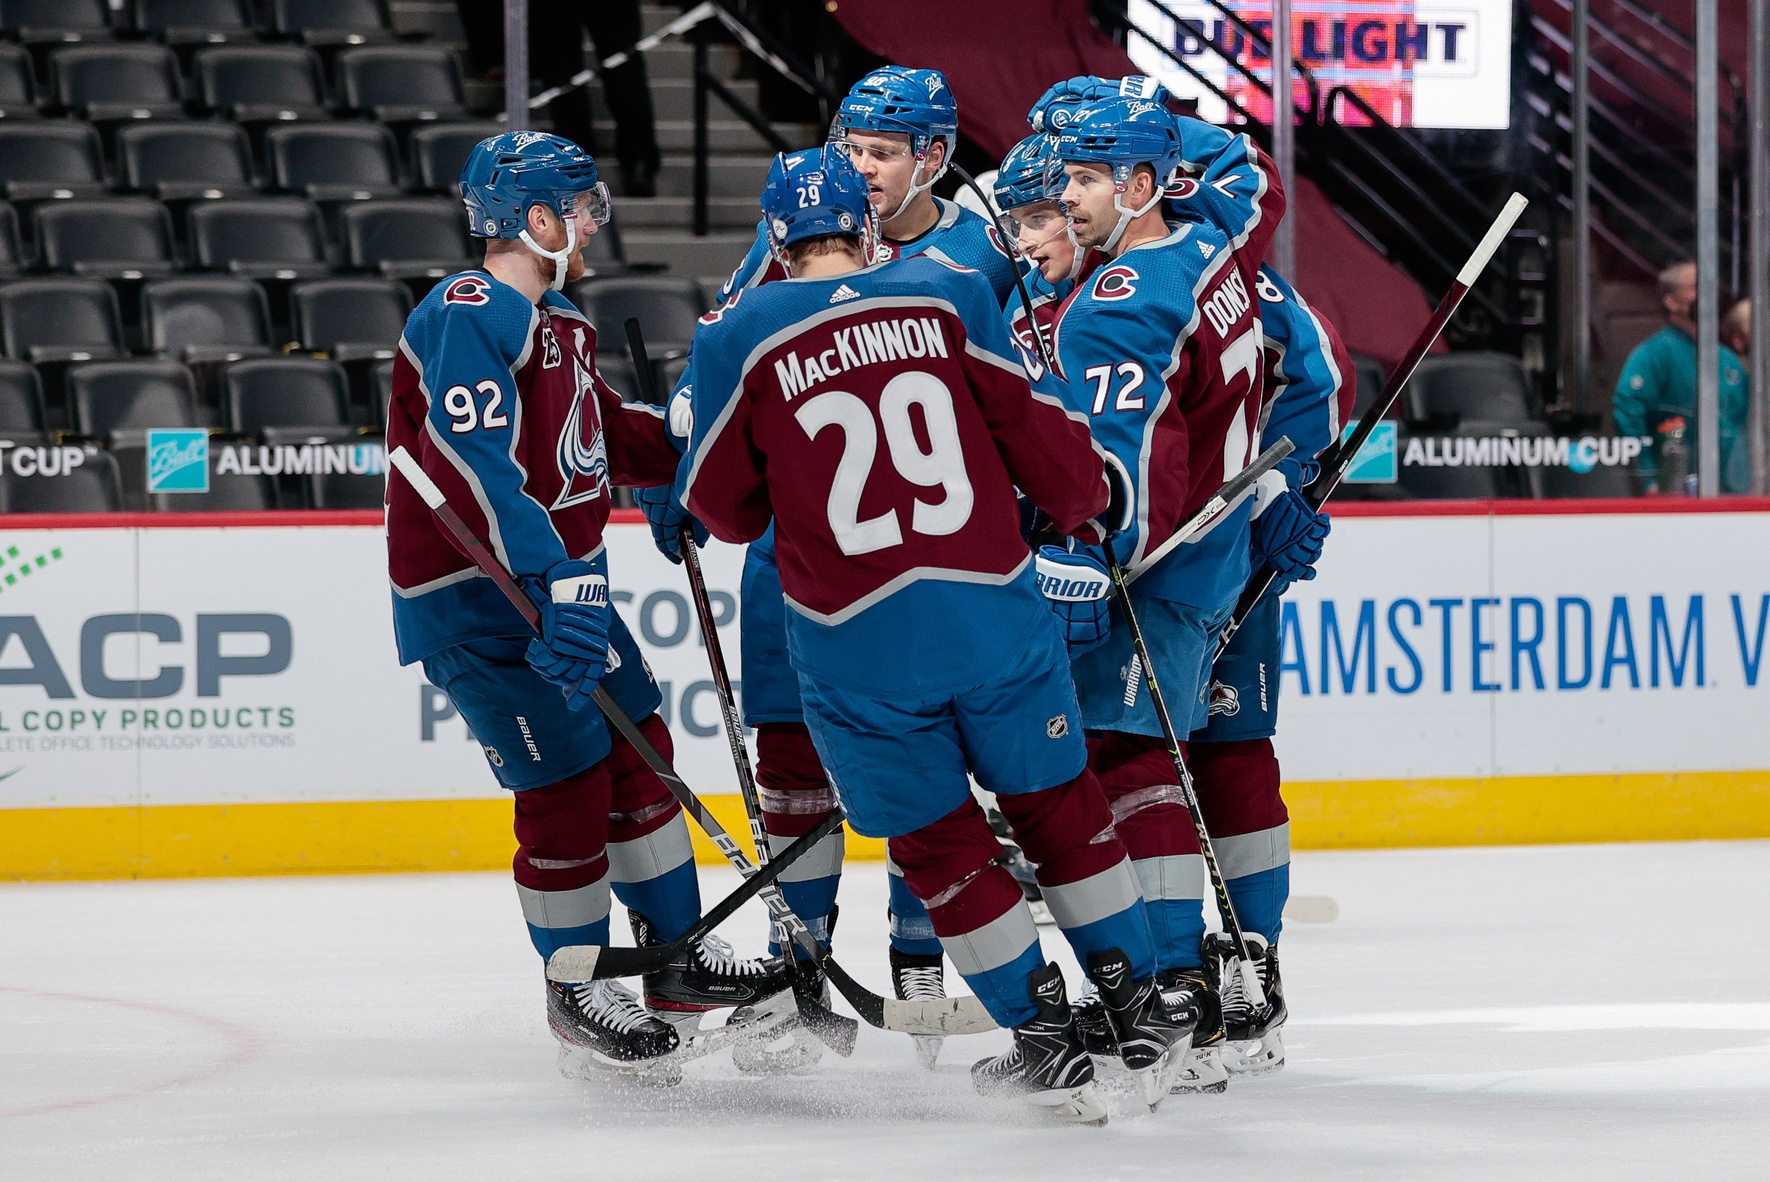 Avalanche lose Girard, Graves to injuries in 3-0 shutout over San Jose Sharks - Mile High Sports